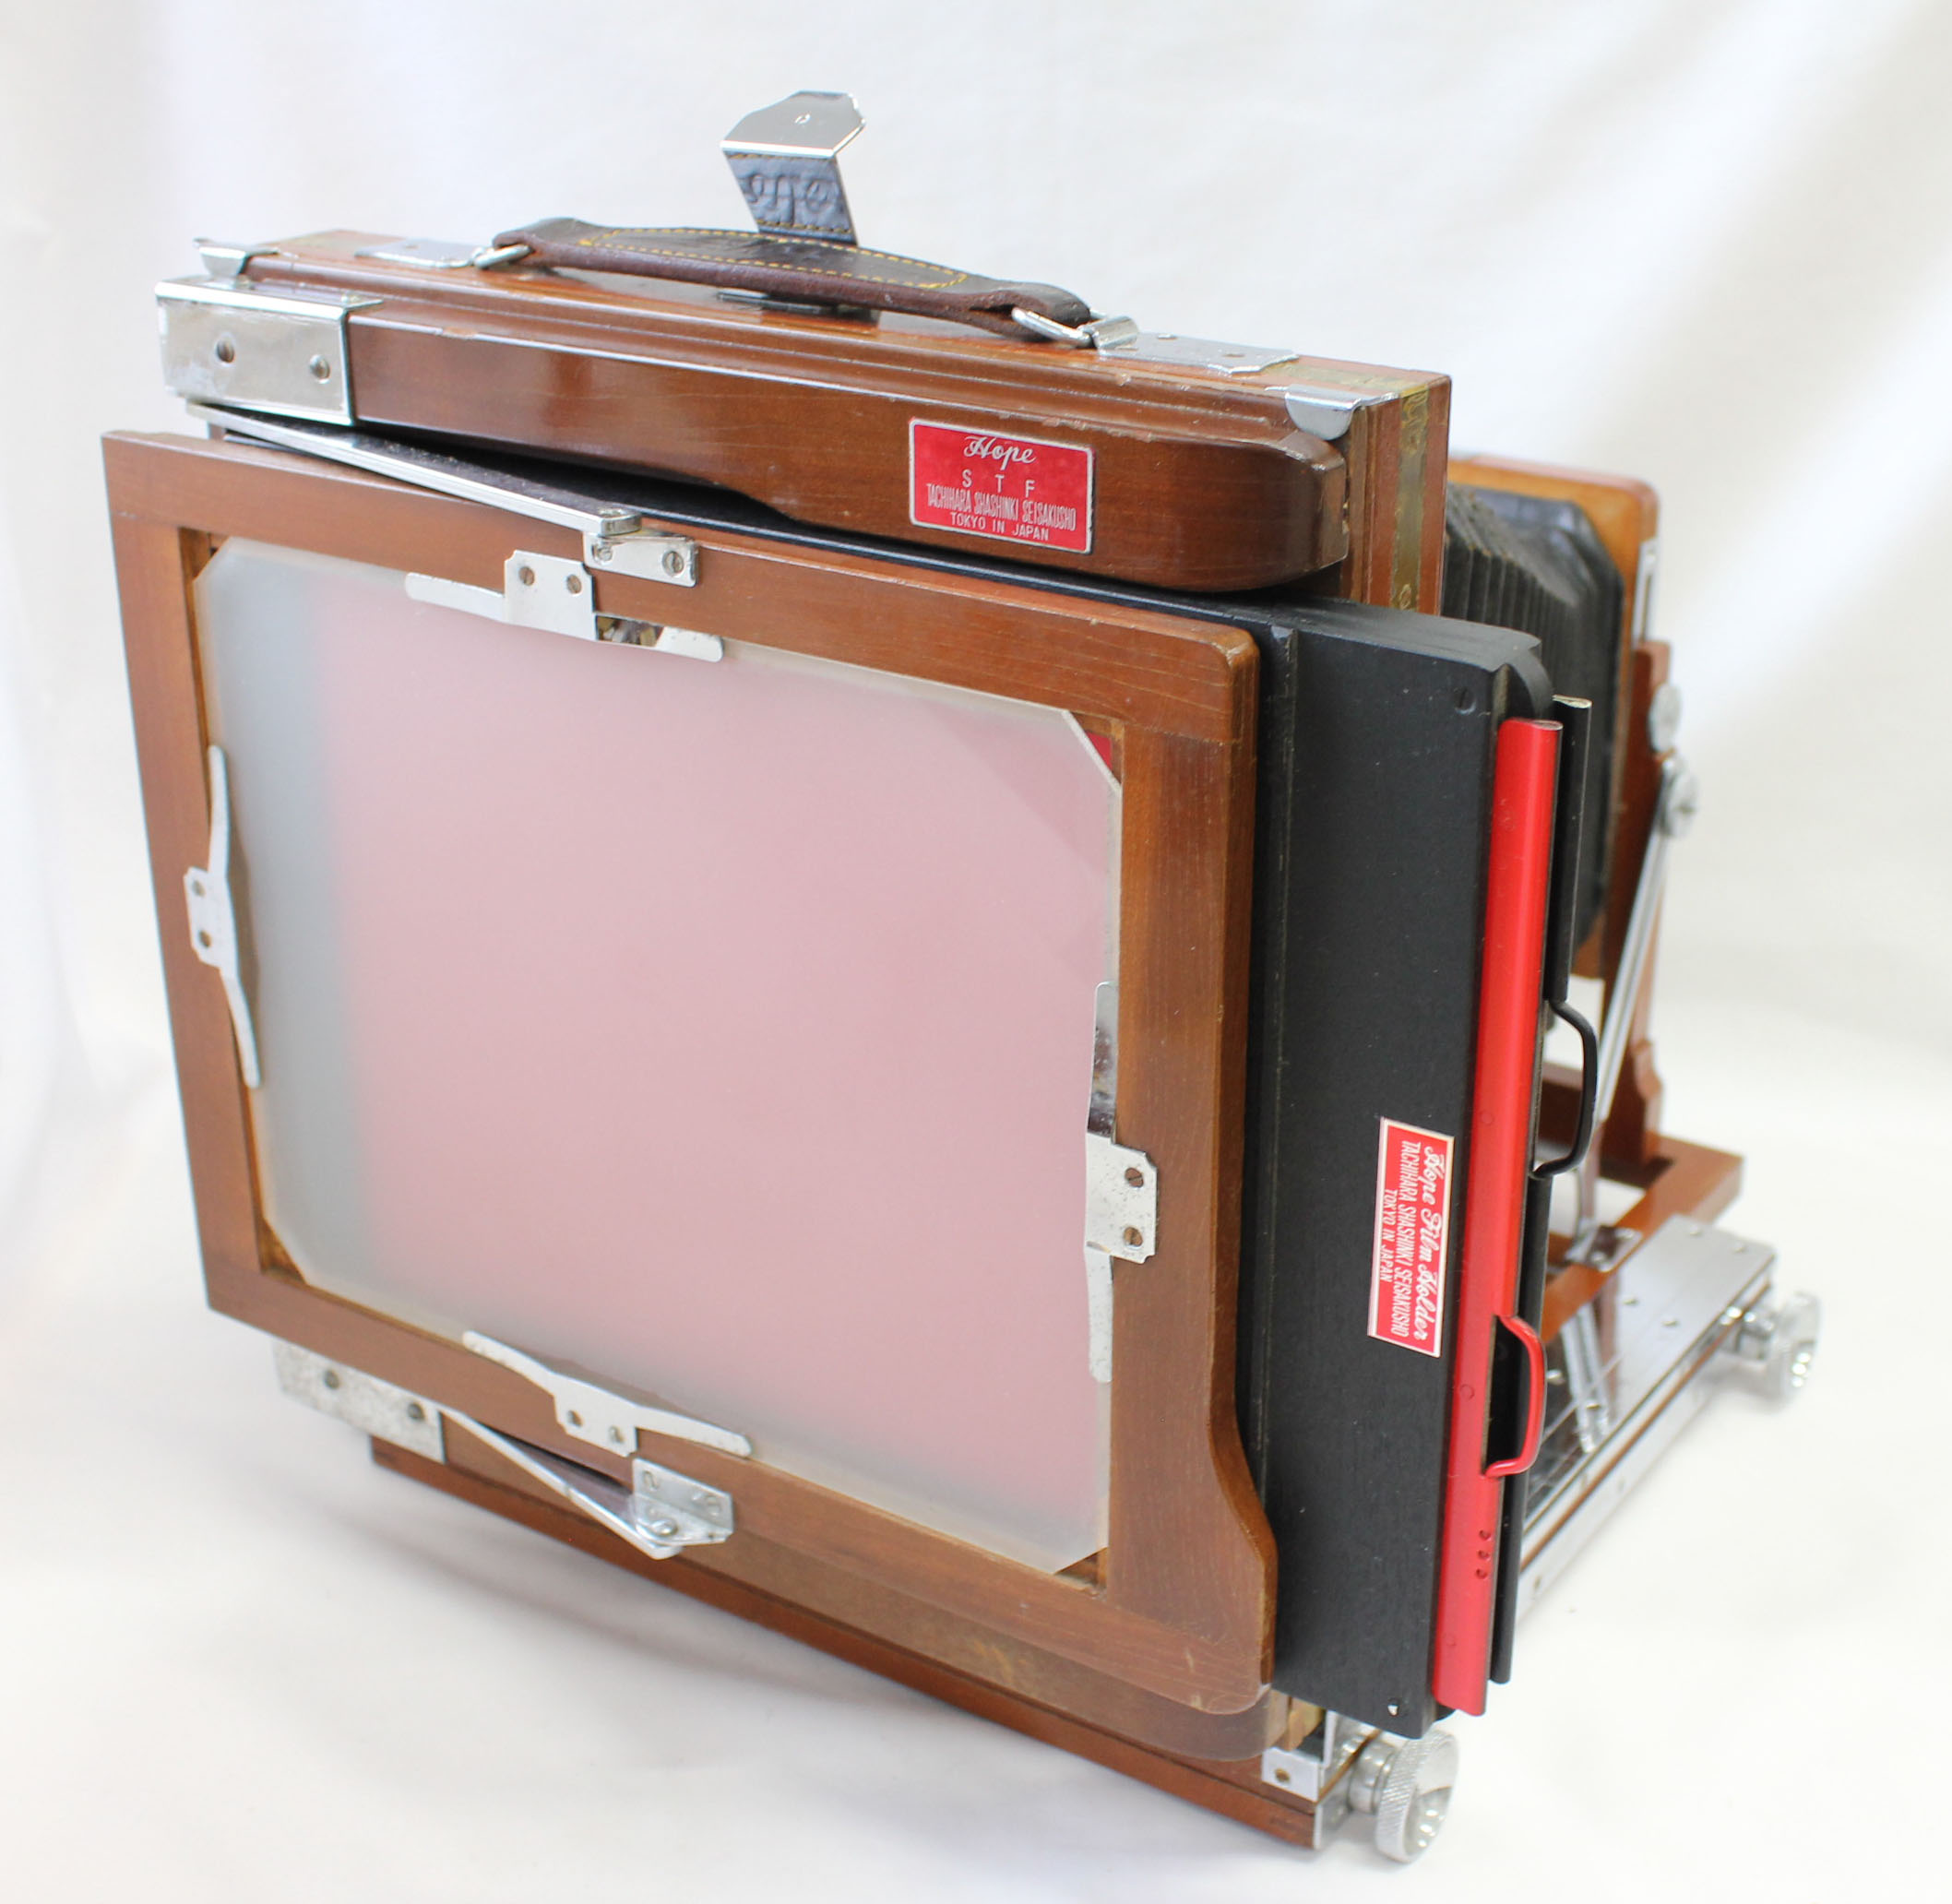  Tachihara Hope A STF 6 1/2x8 1/2 6.5x8.5inch 165x216mm Wood Field Camera with 8 Cut Film Holder from Japan Photo 8